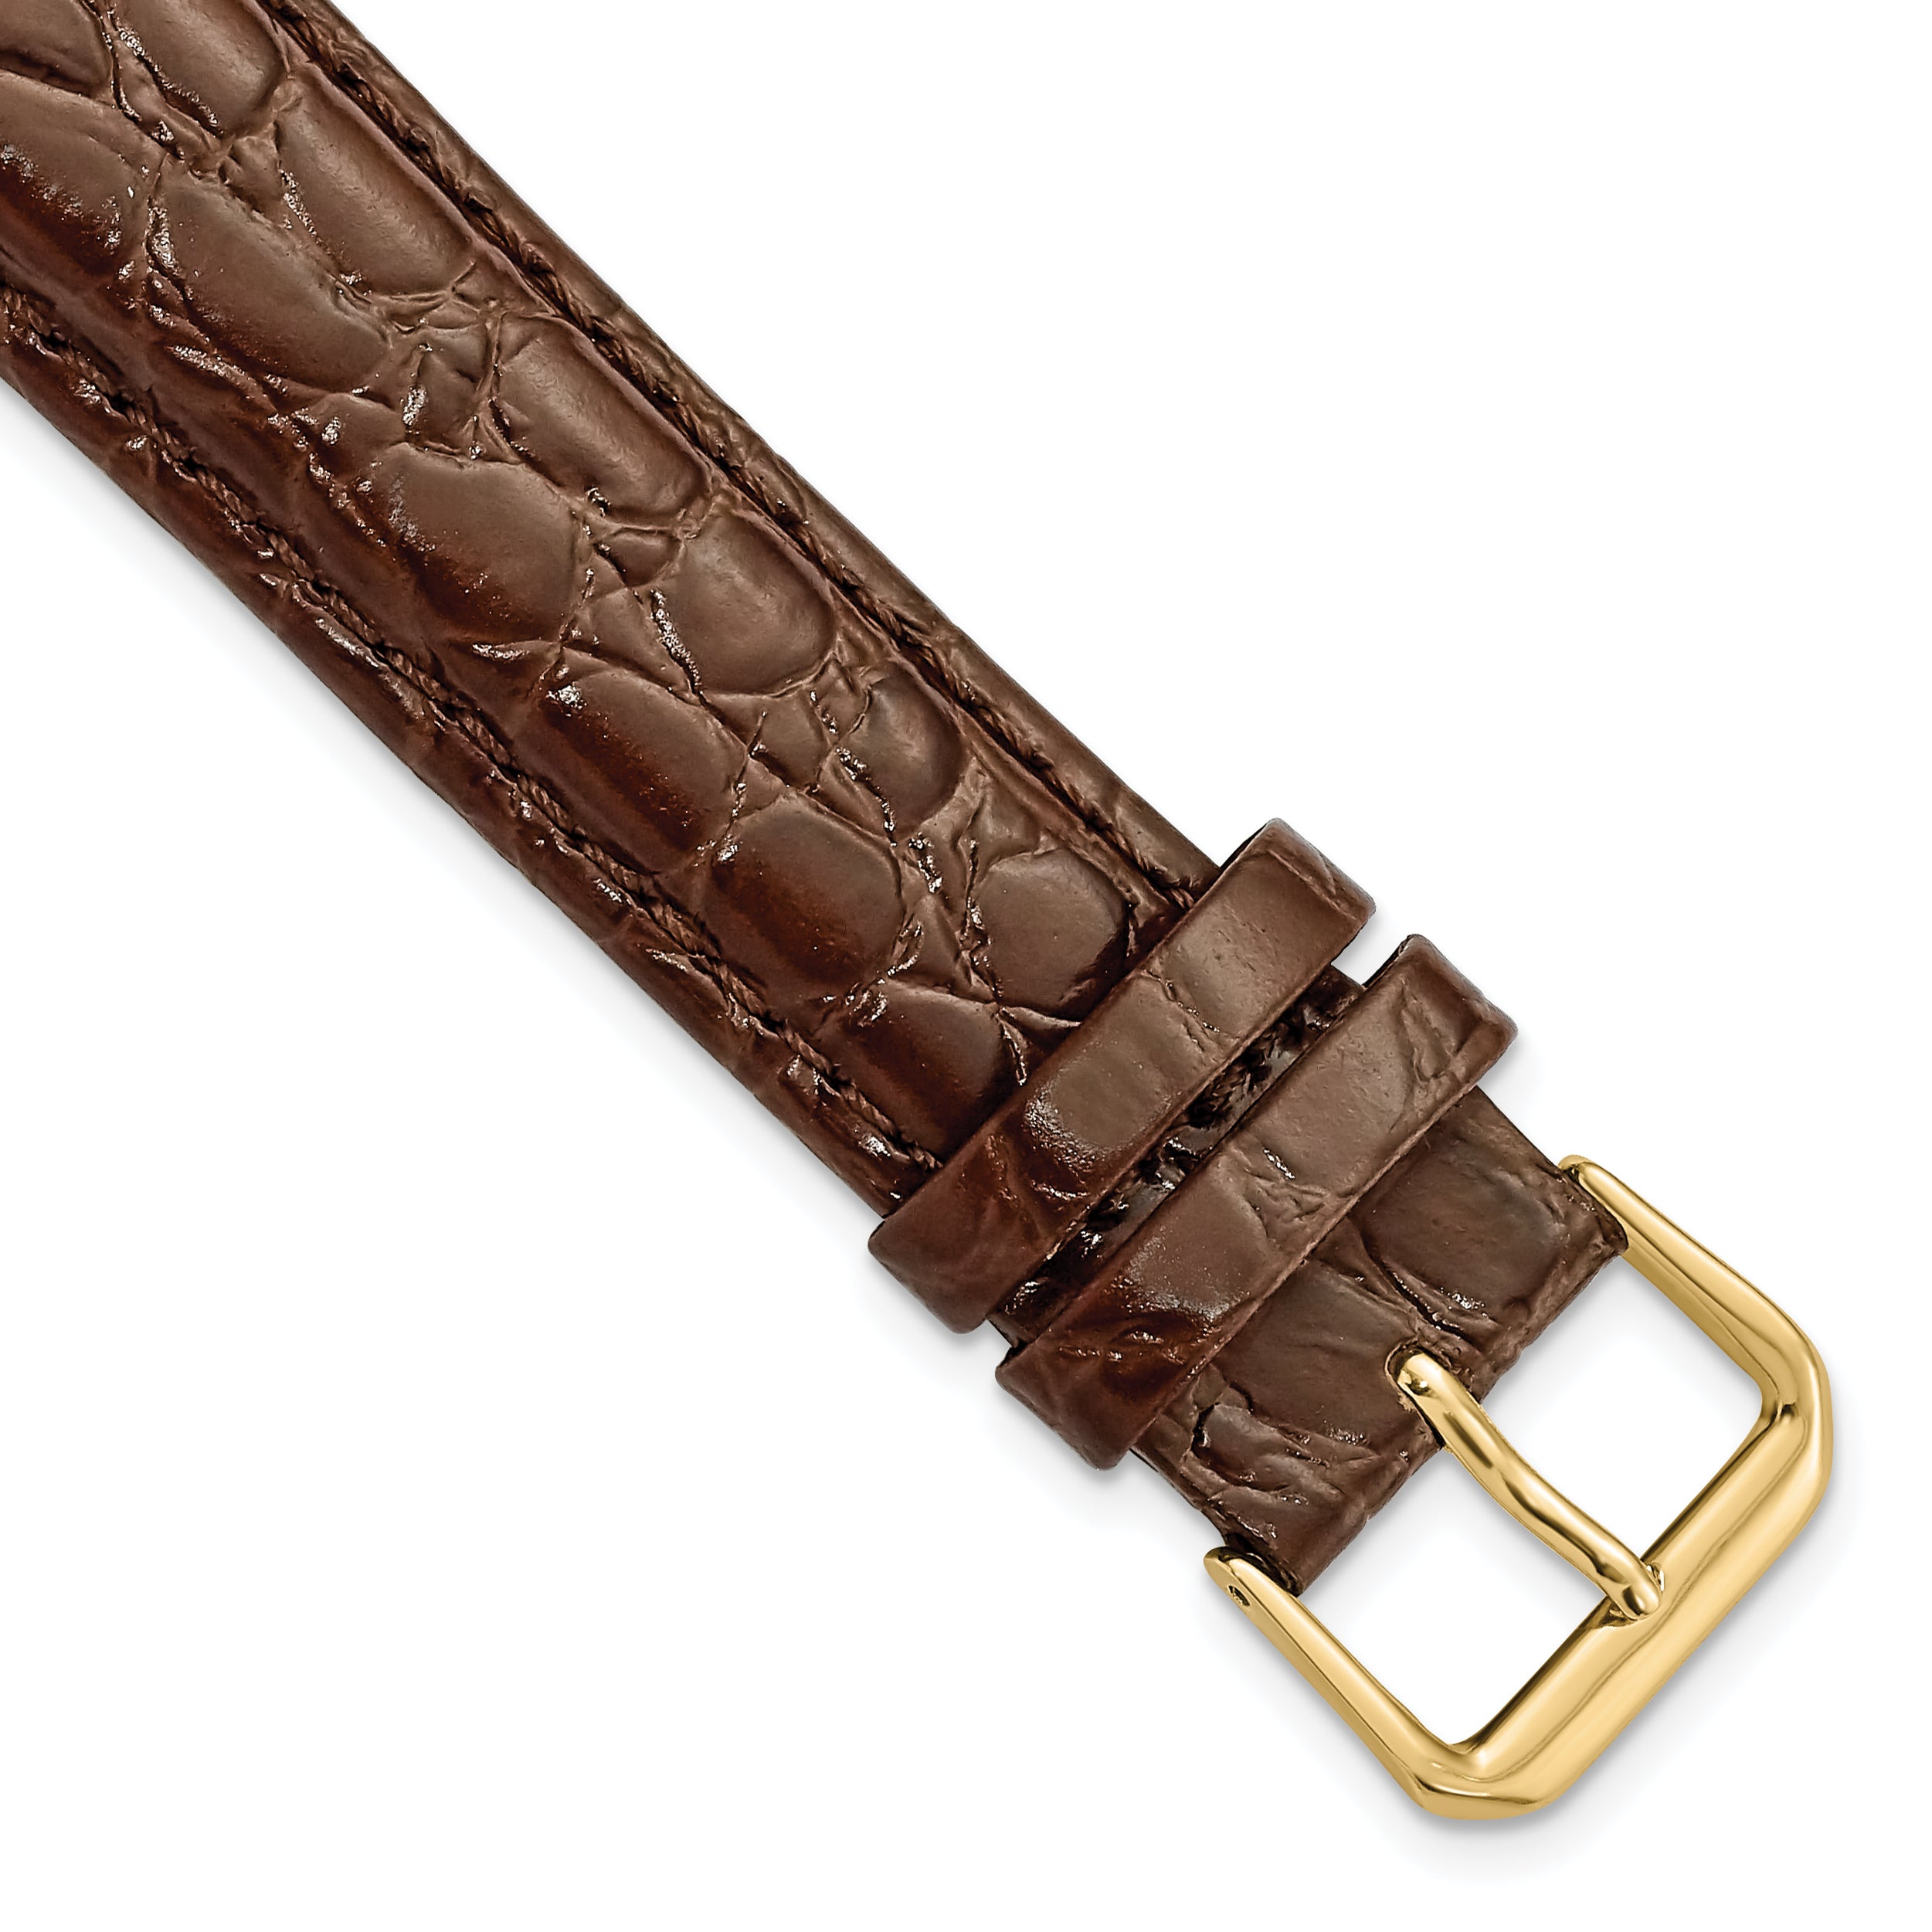 DeBeer 20mm Extra Long Brown Alligator Grain Leather with Gold-tone Buckle 9.5 inch Watch Band